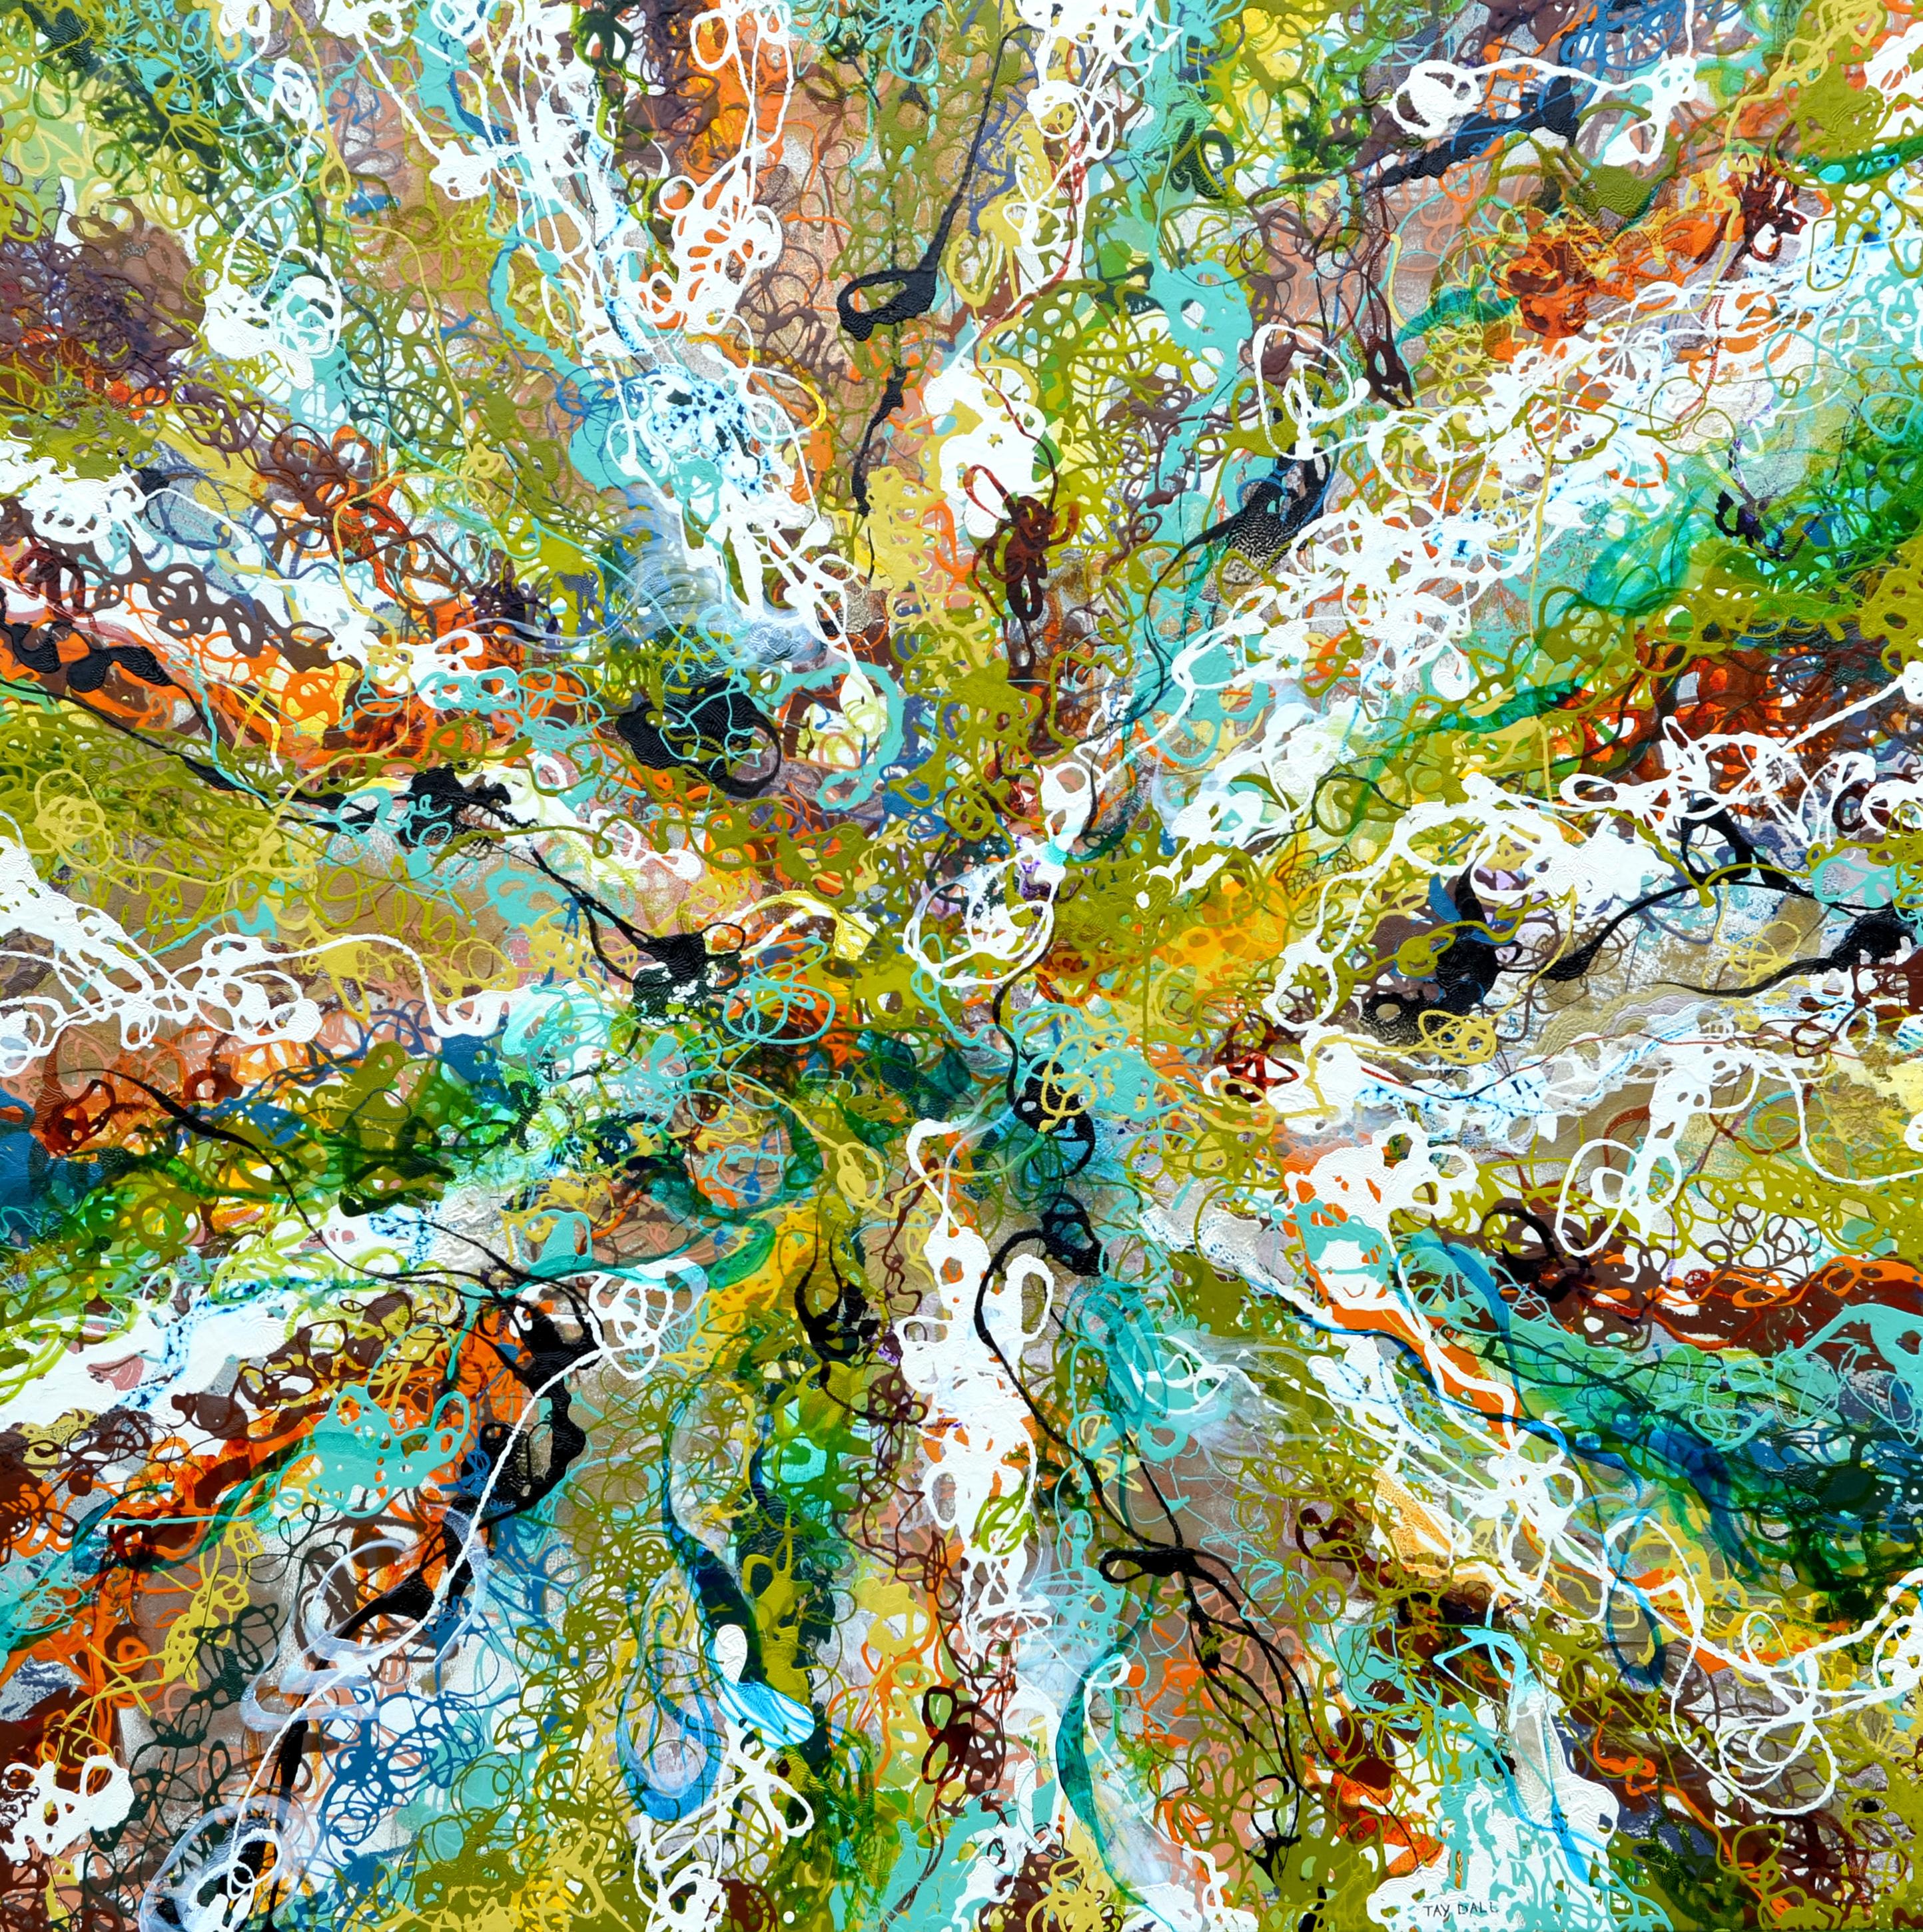 Abstract Painting Tay Dall - Peinture abstraite verte colorée « New Intuition 1 » (New Intuition)